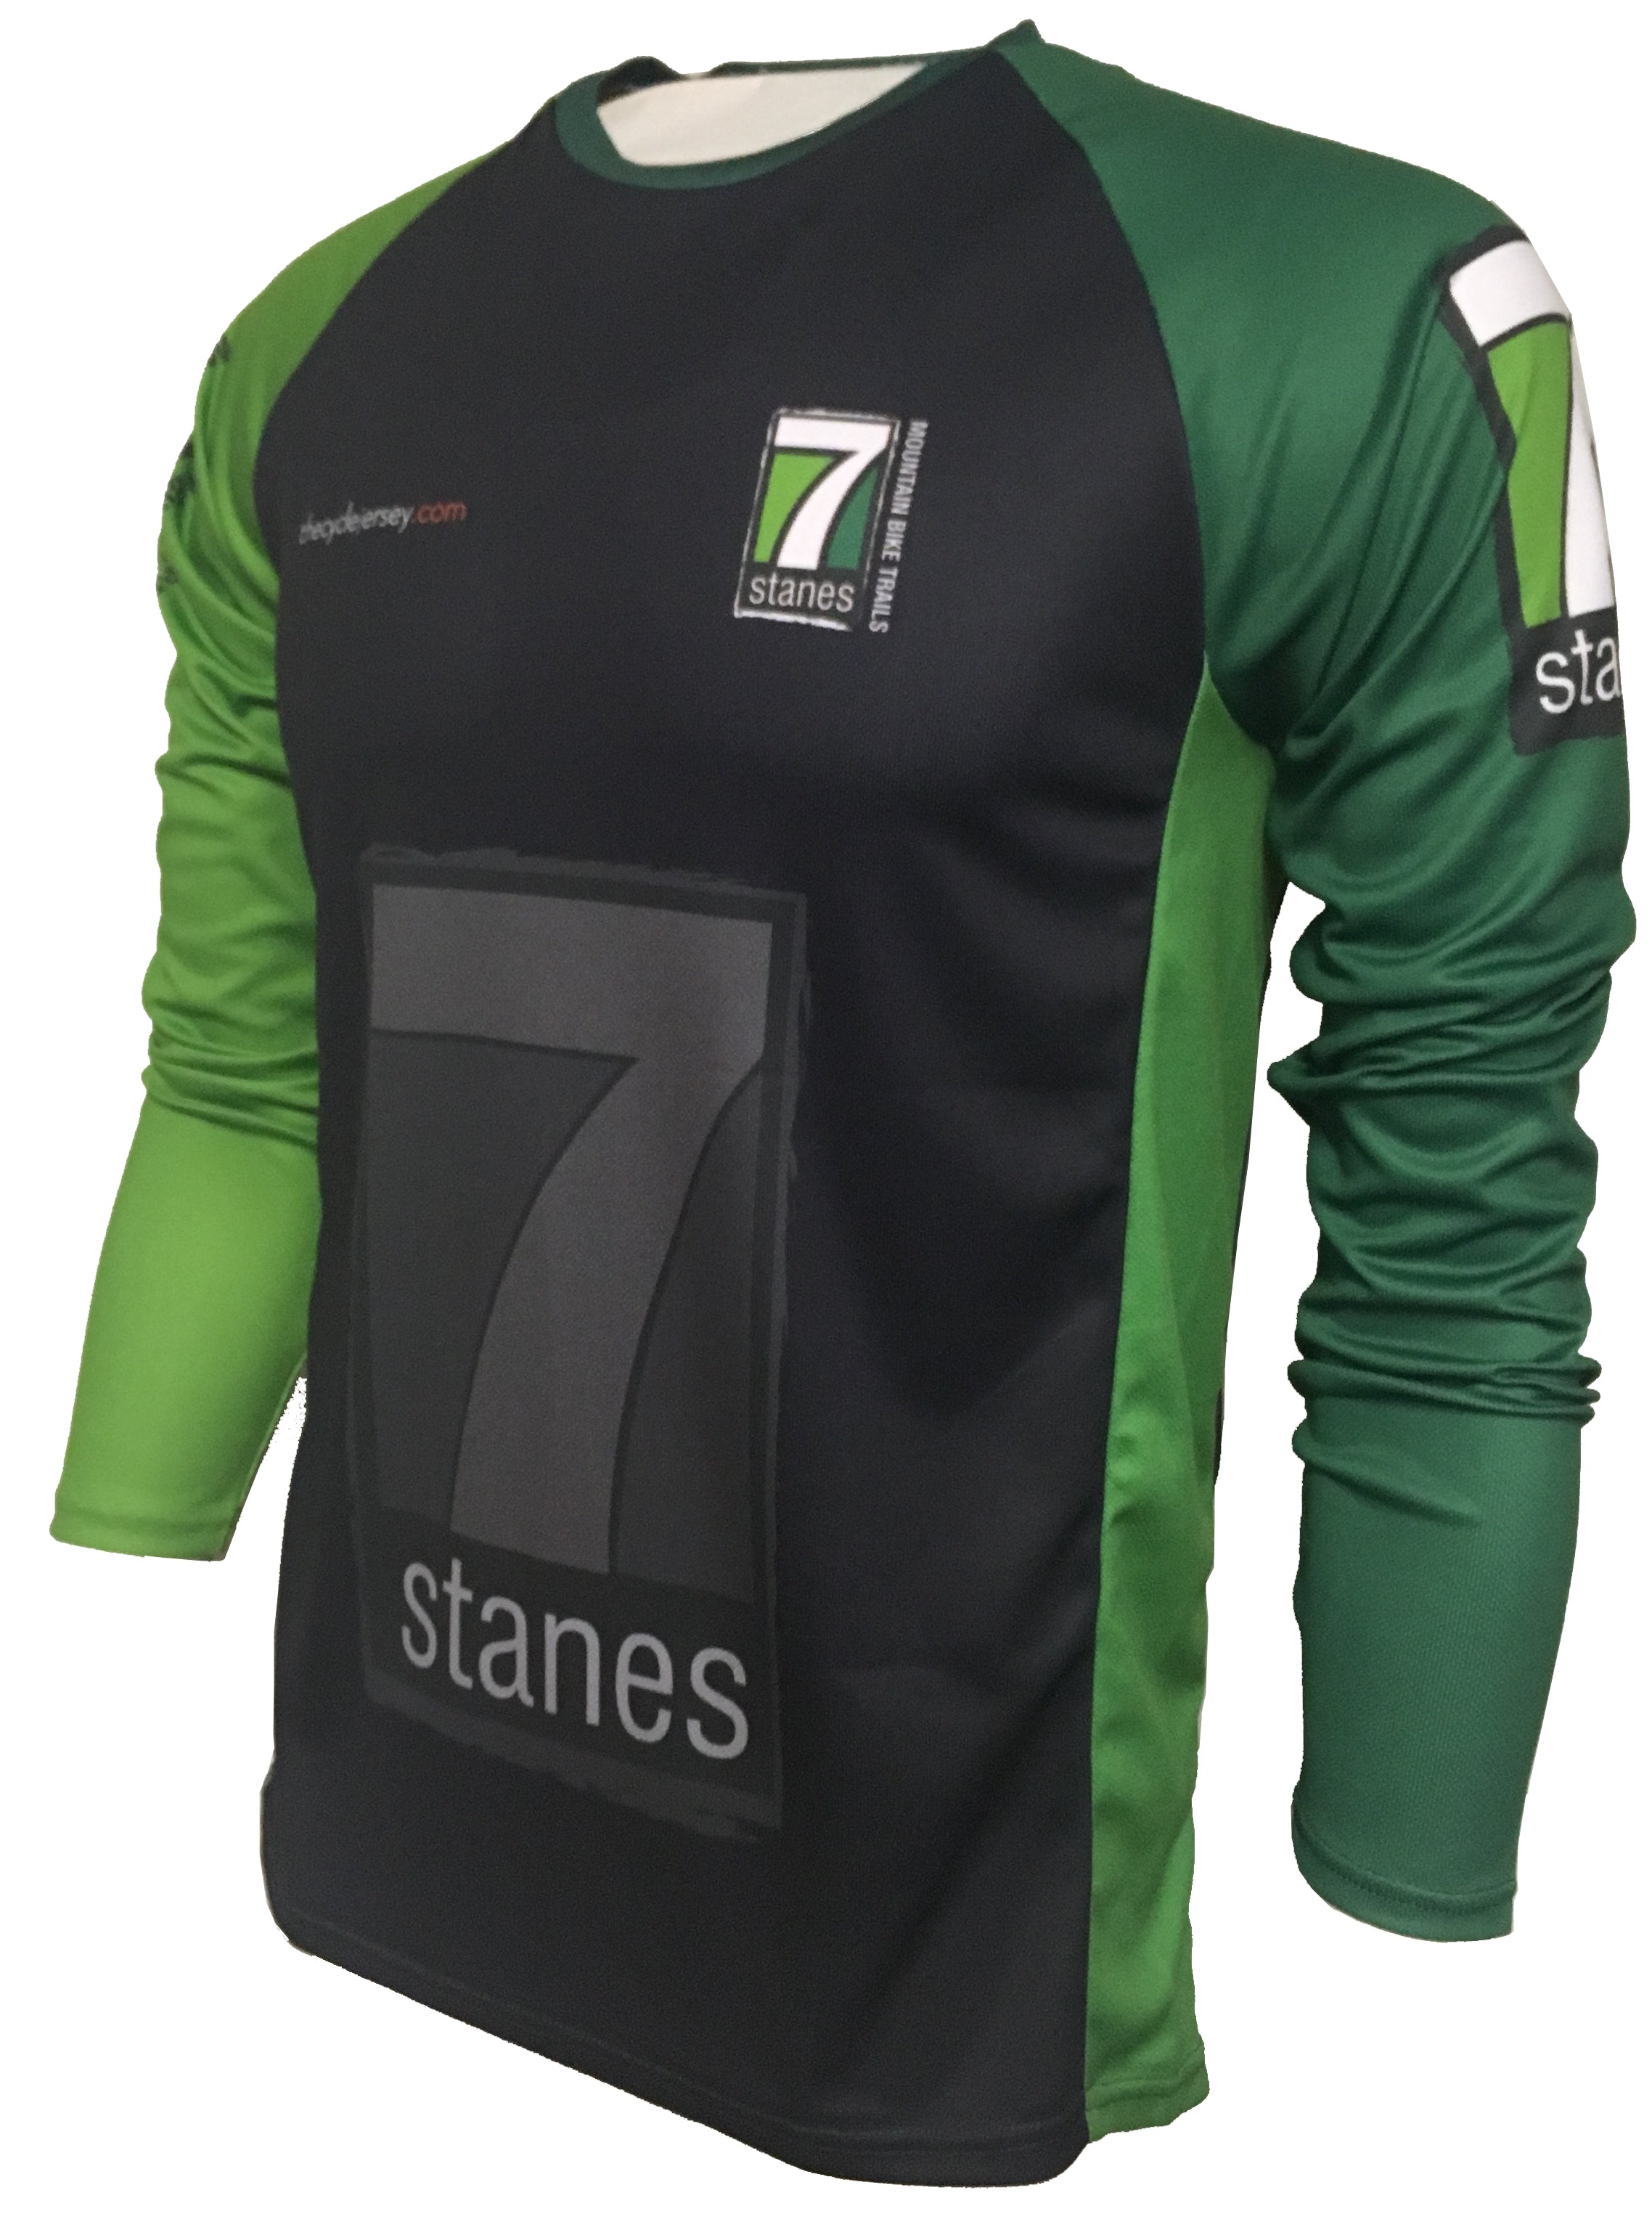 7stanes Enduro Cycling Jersey Front